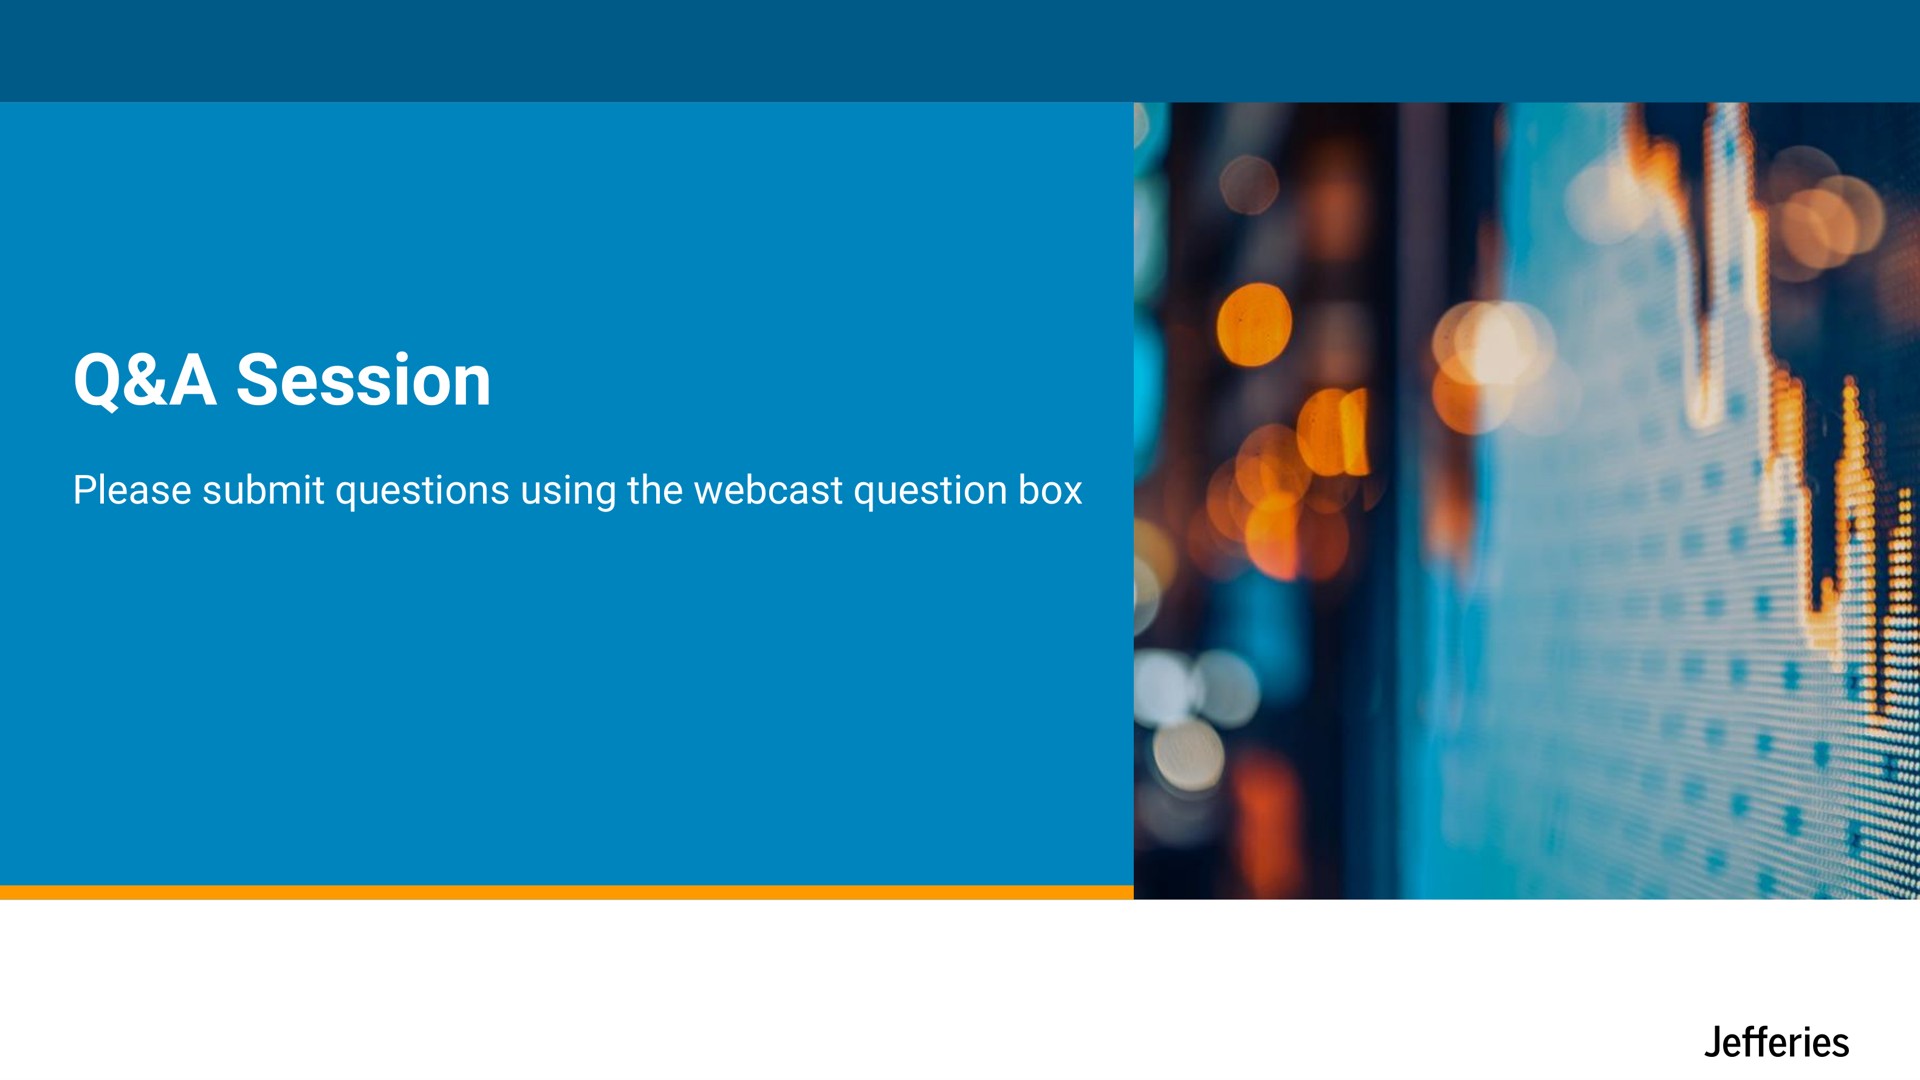 a session please submit questions using the question box | Jefferies Financial Group